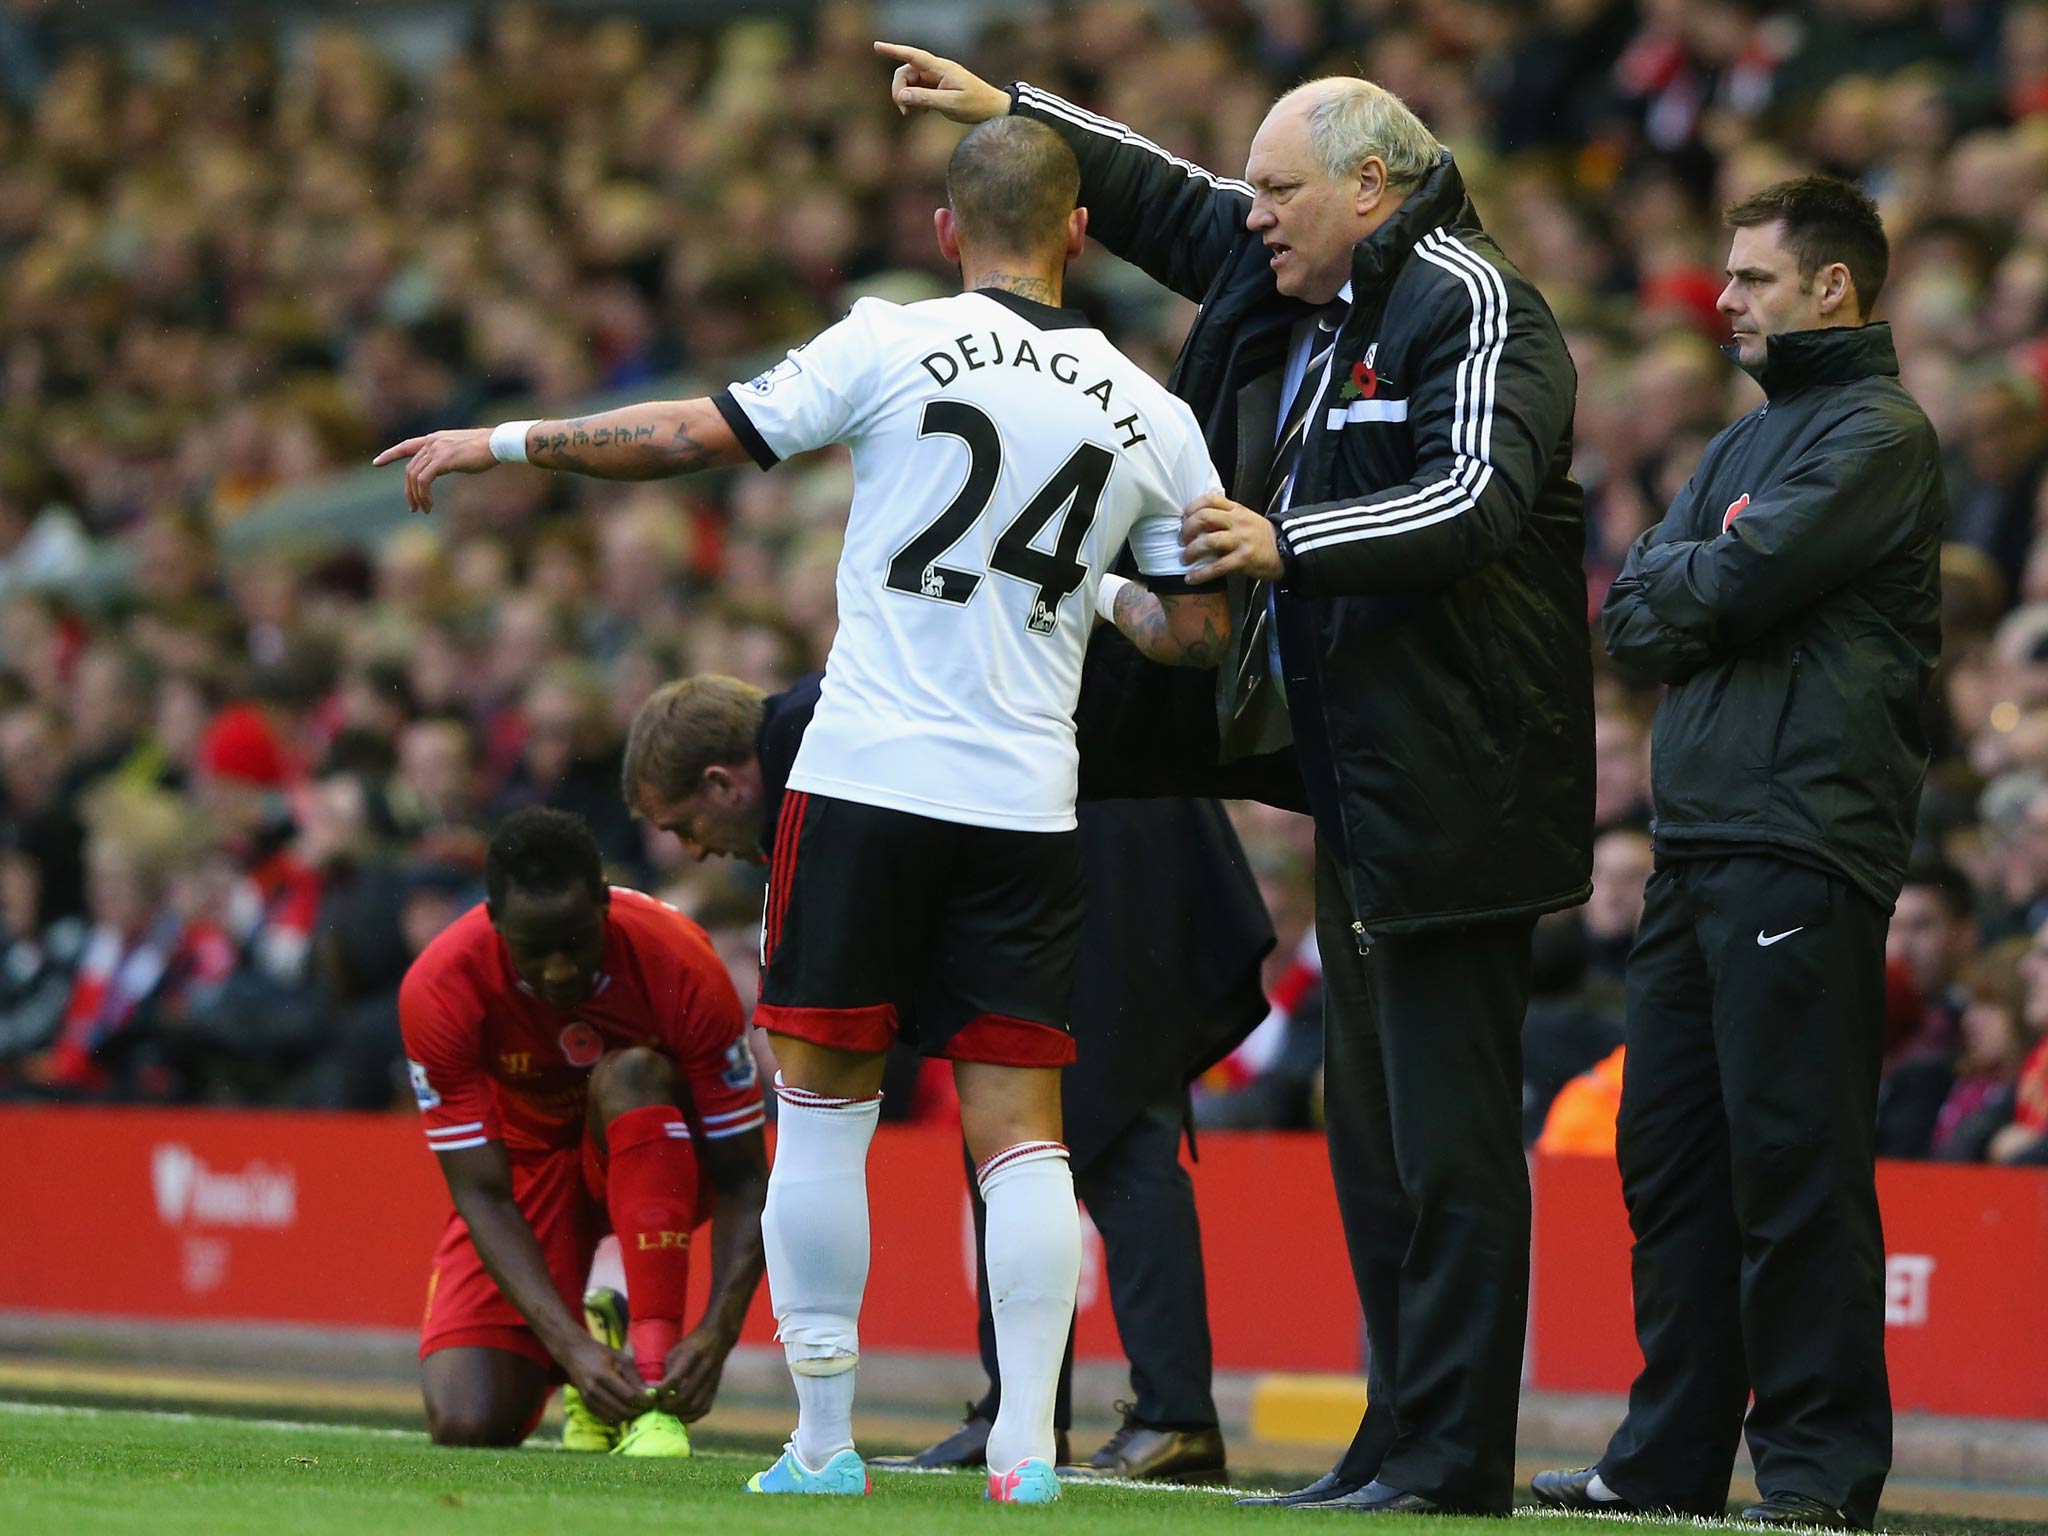 Fulham Manager Martin Jol gives orders to Ashkan Dejagah during the Barclays Premier League match between Liverpool and Fulham at Anfield